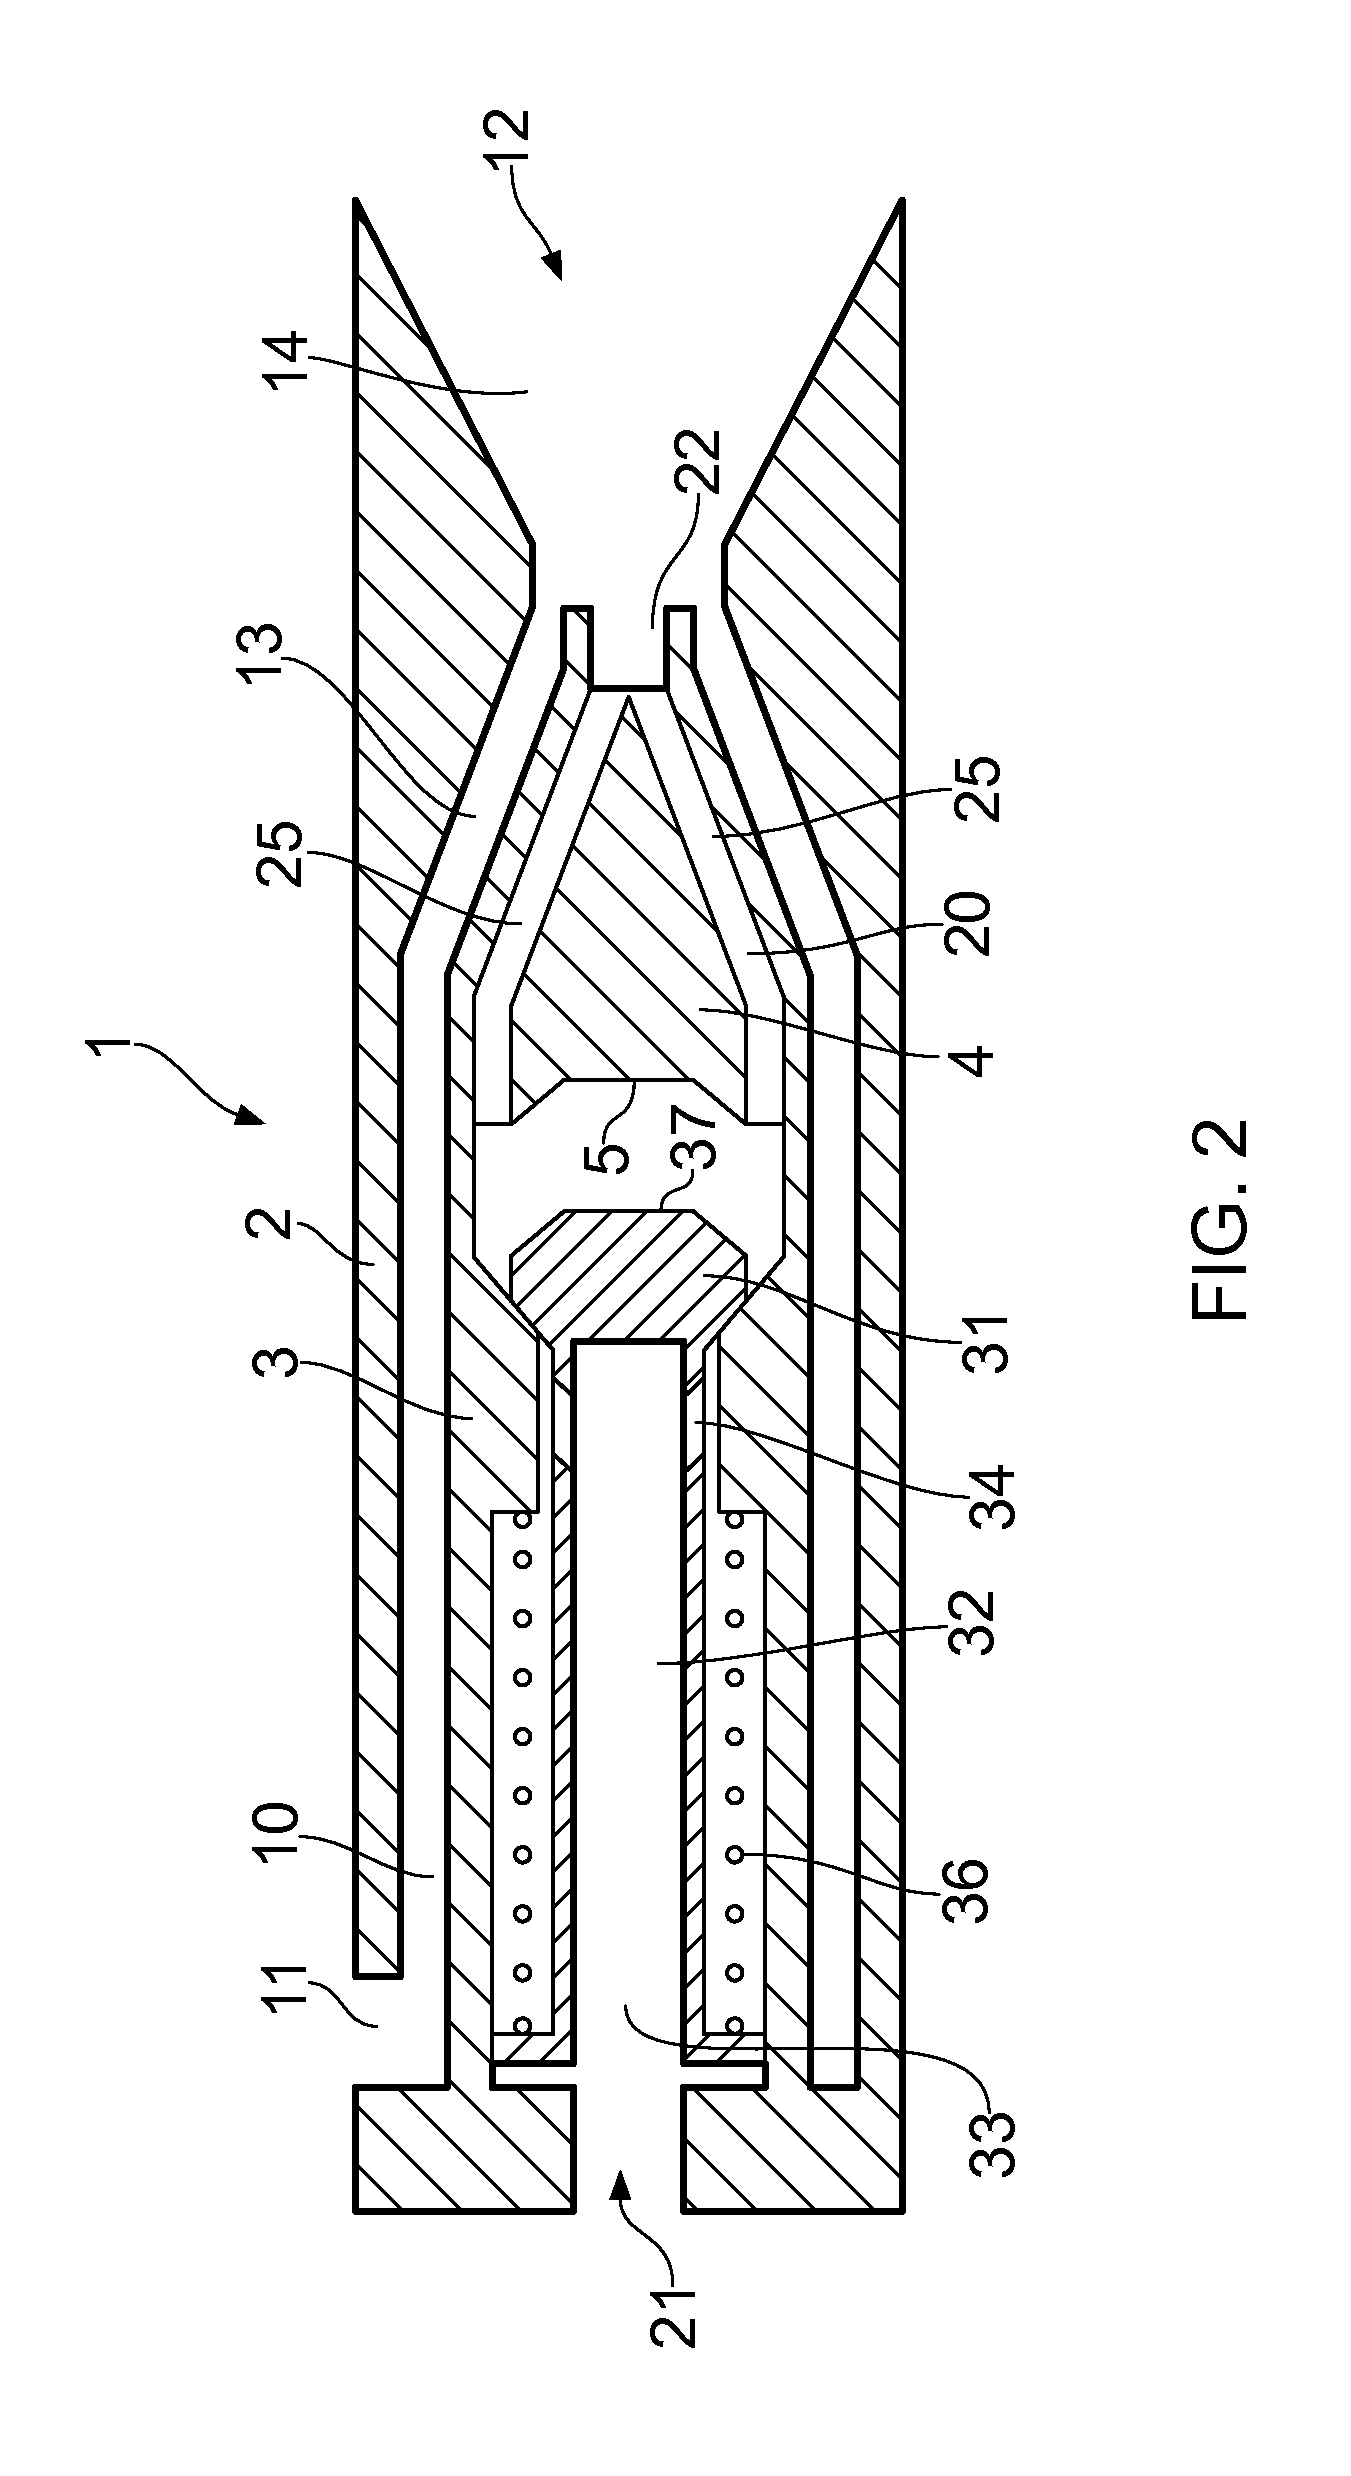 Device and method of enhancing production of hydrocarbons